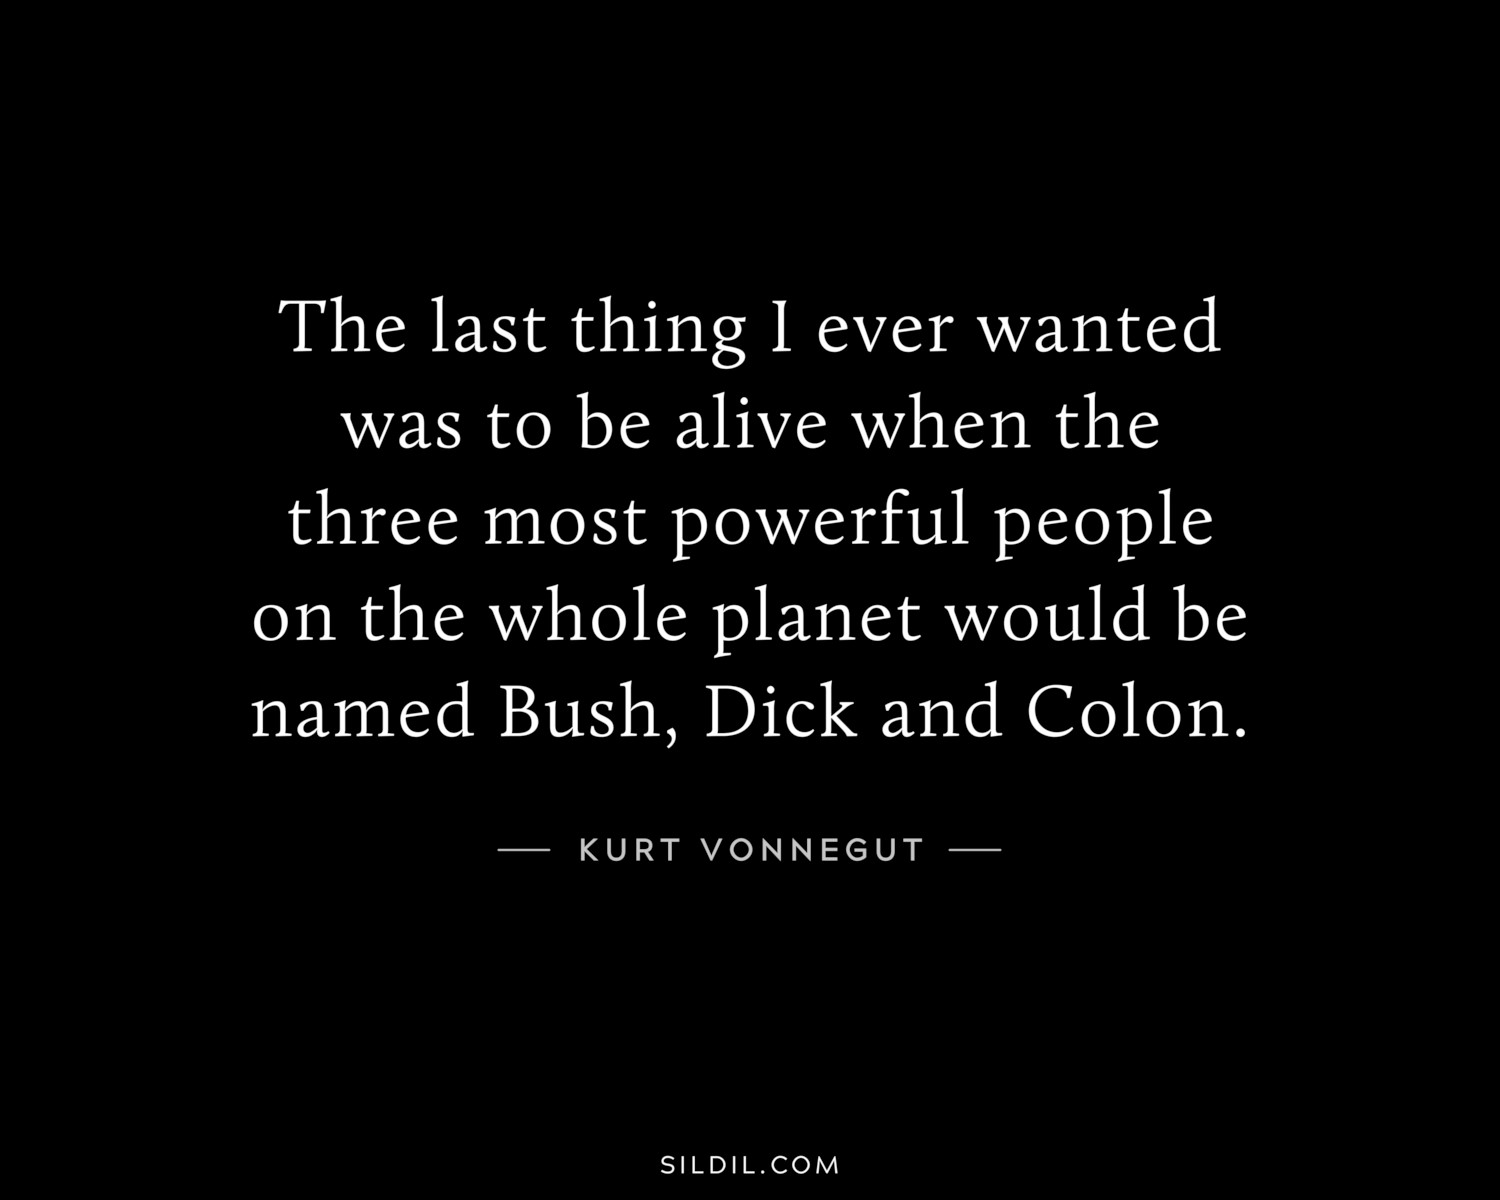 The last thing I ever wanted was to be alive when the three most powerful people on the whole planet would be named Bush, Dick and Colon.